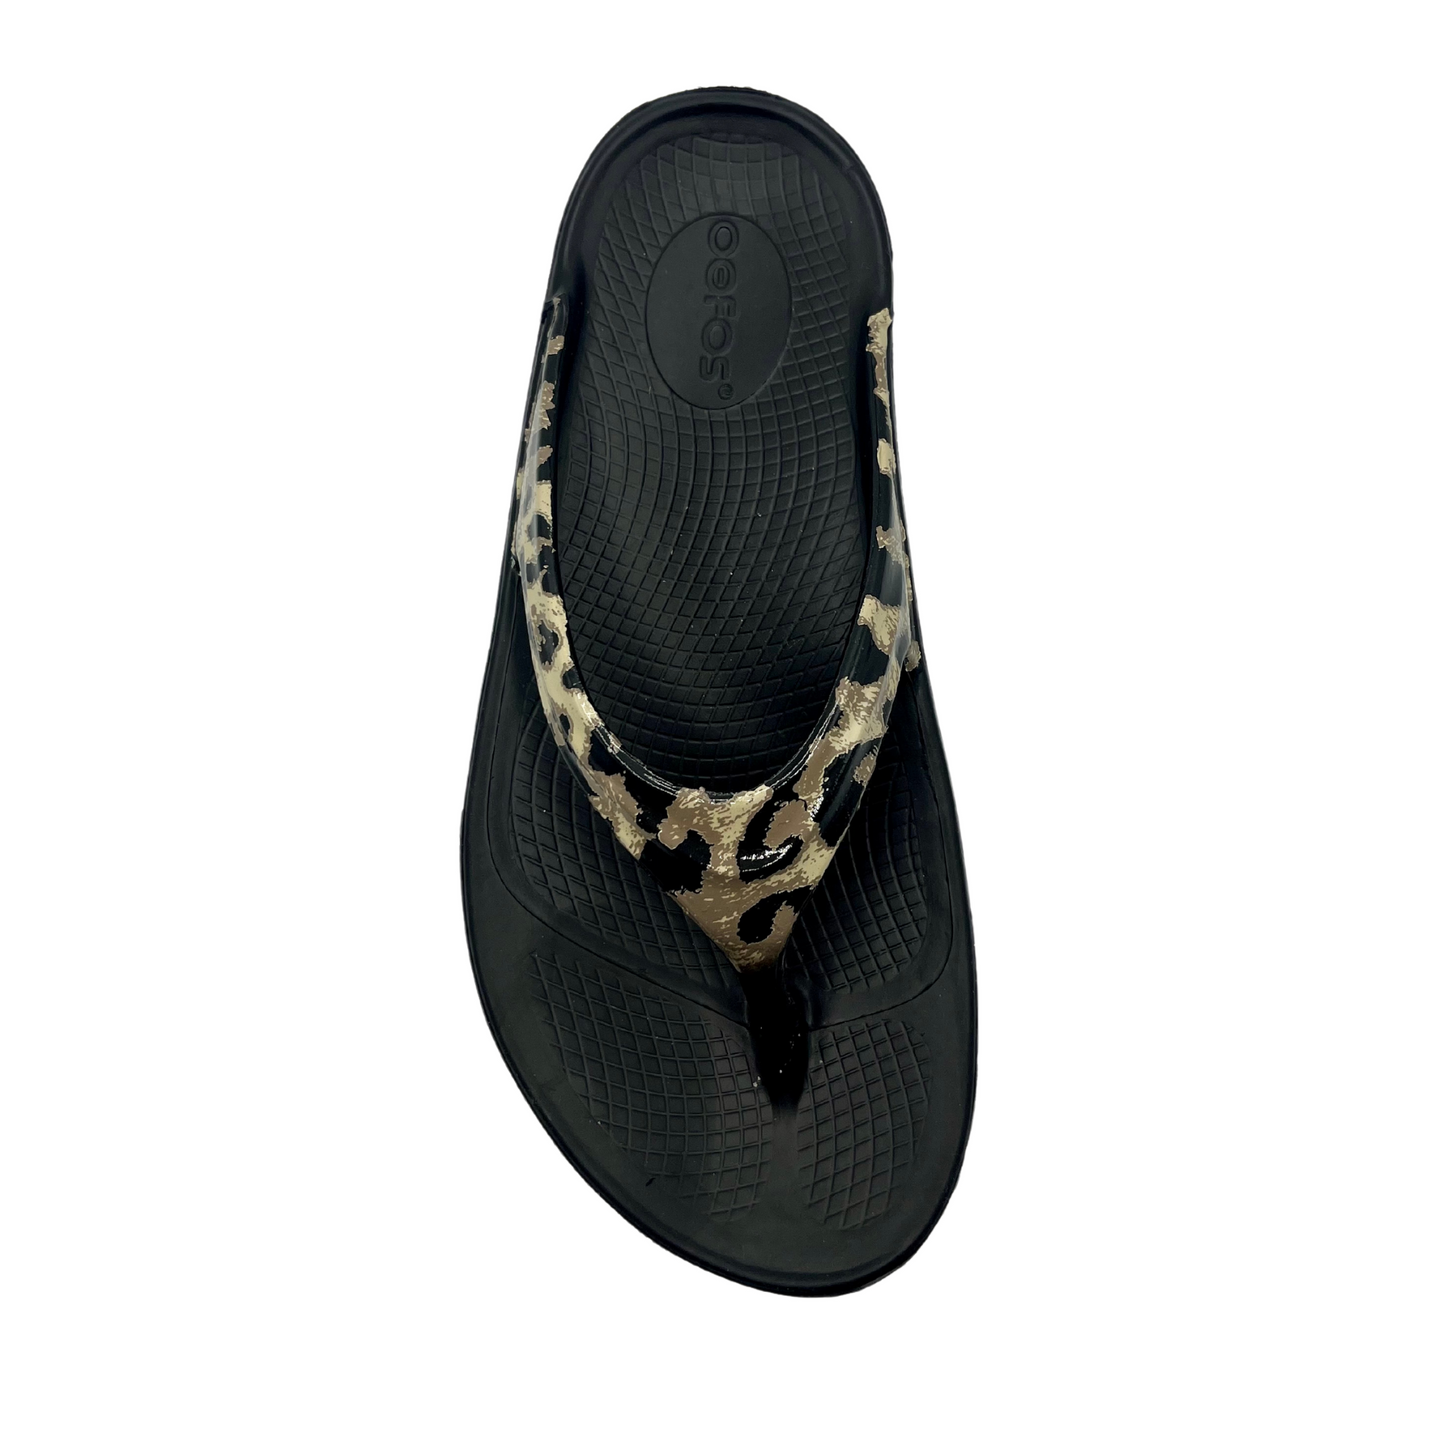 Top view of flip flop sandals with a cheetah print strap